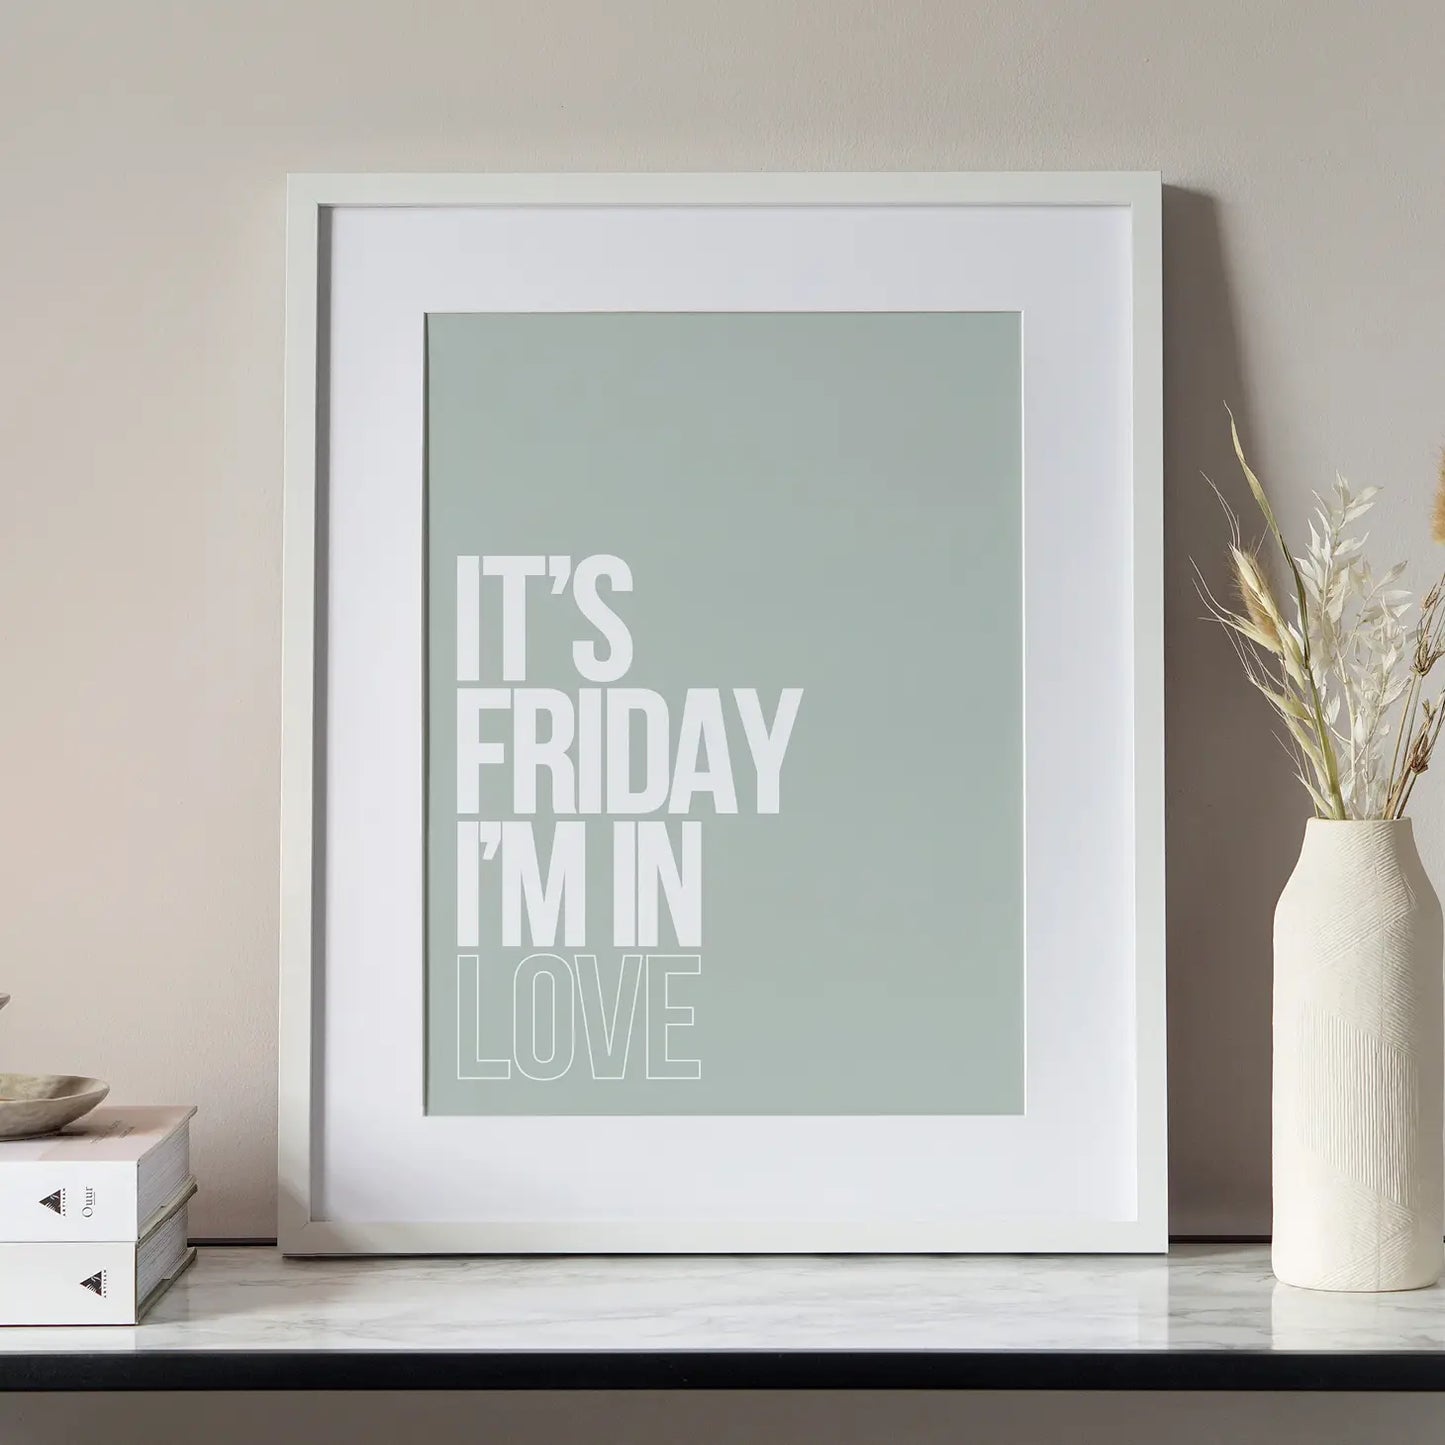 It’s Friday I’m in love A4 poster